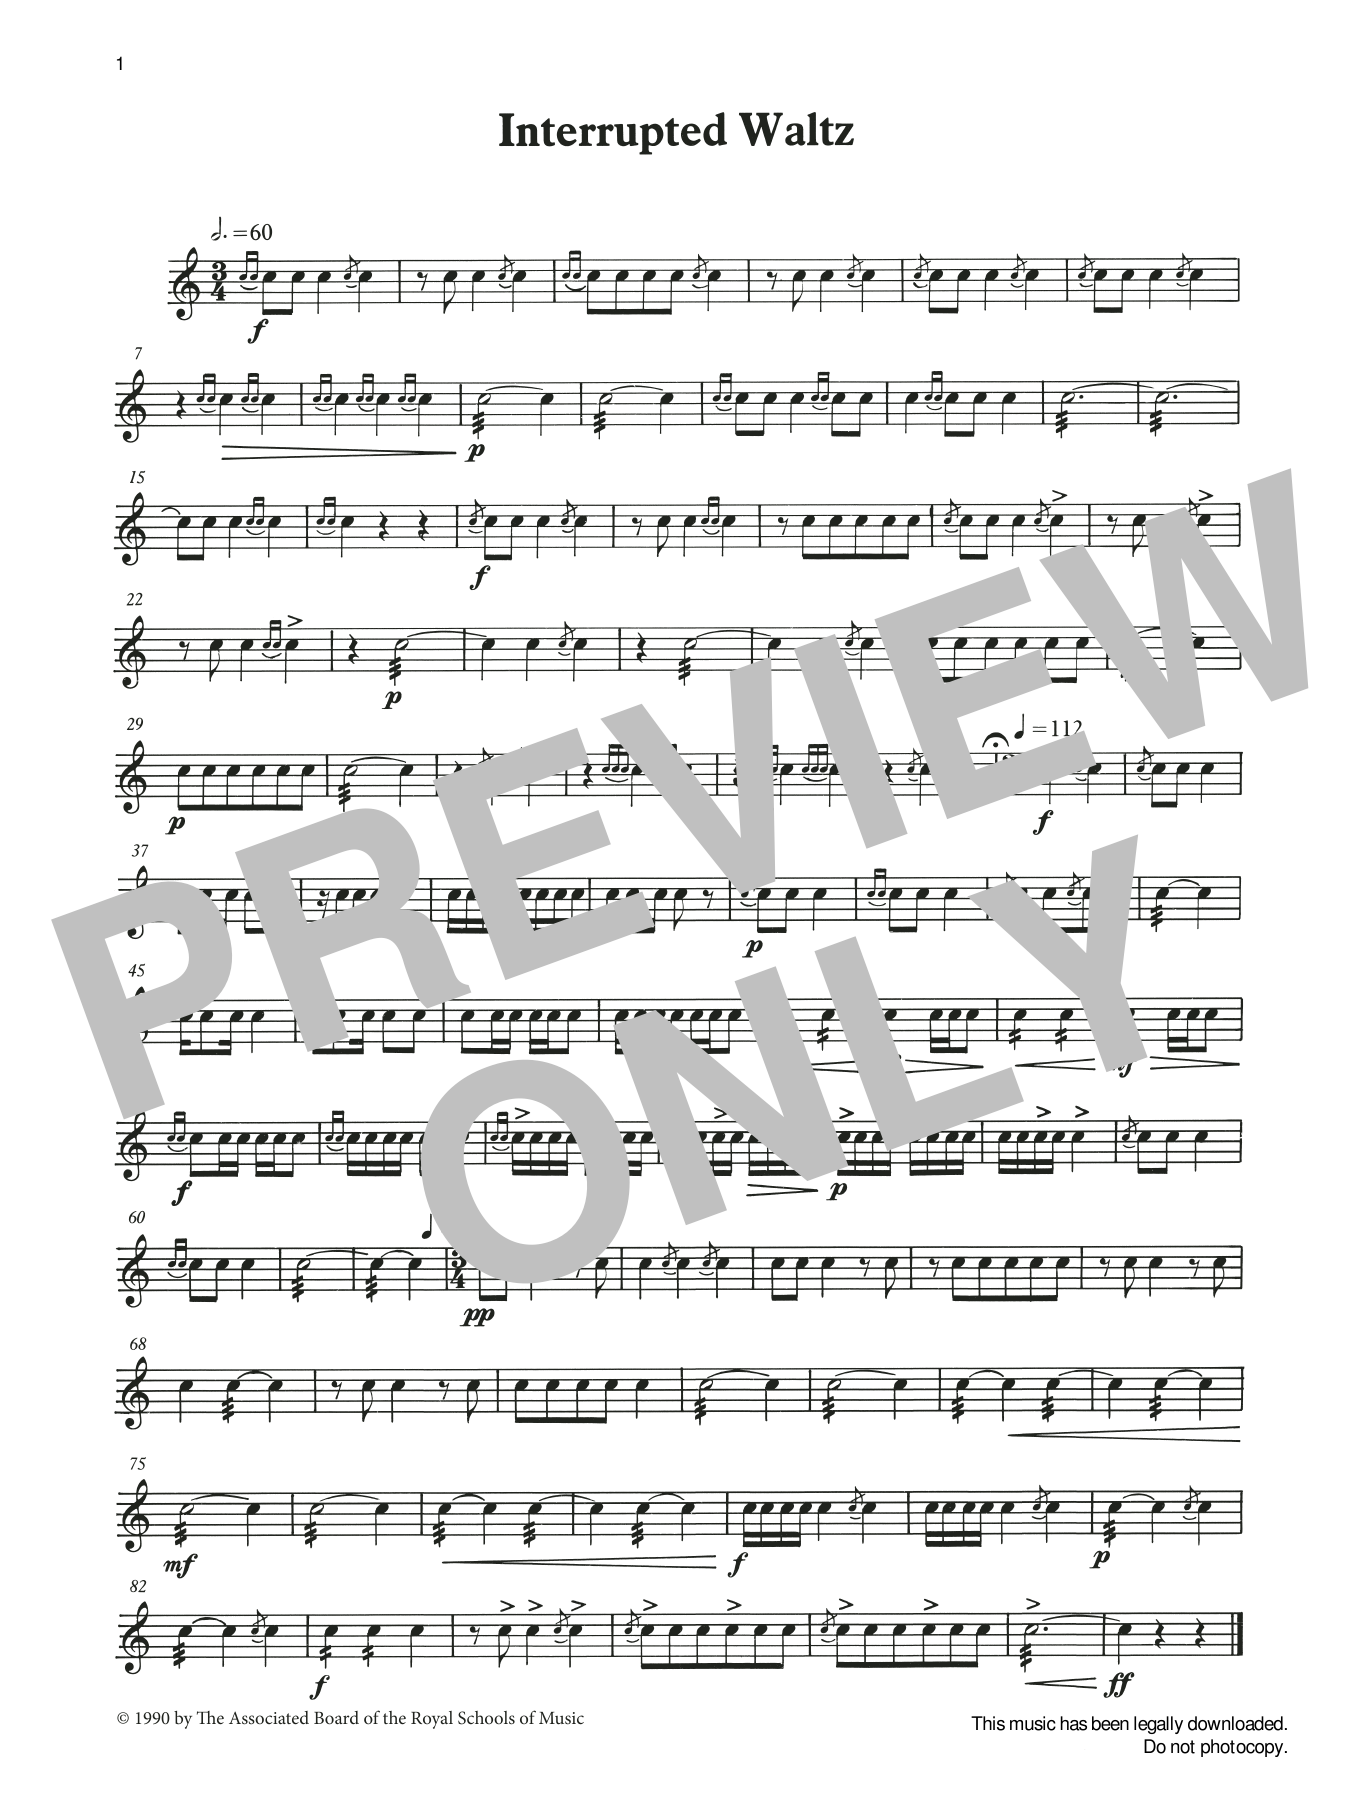 Interrupted Waltz from Graded Music for Snare Drum, Book II (Percussion Solo) von Ian Wright and Kevin Hathaway